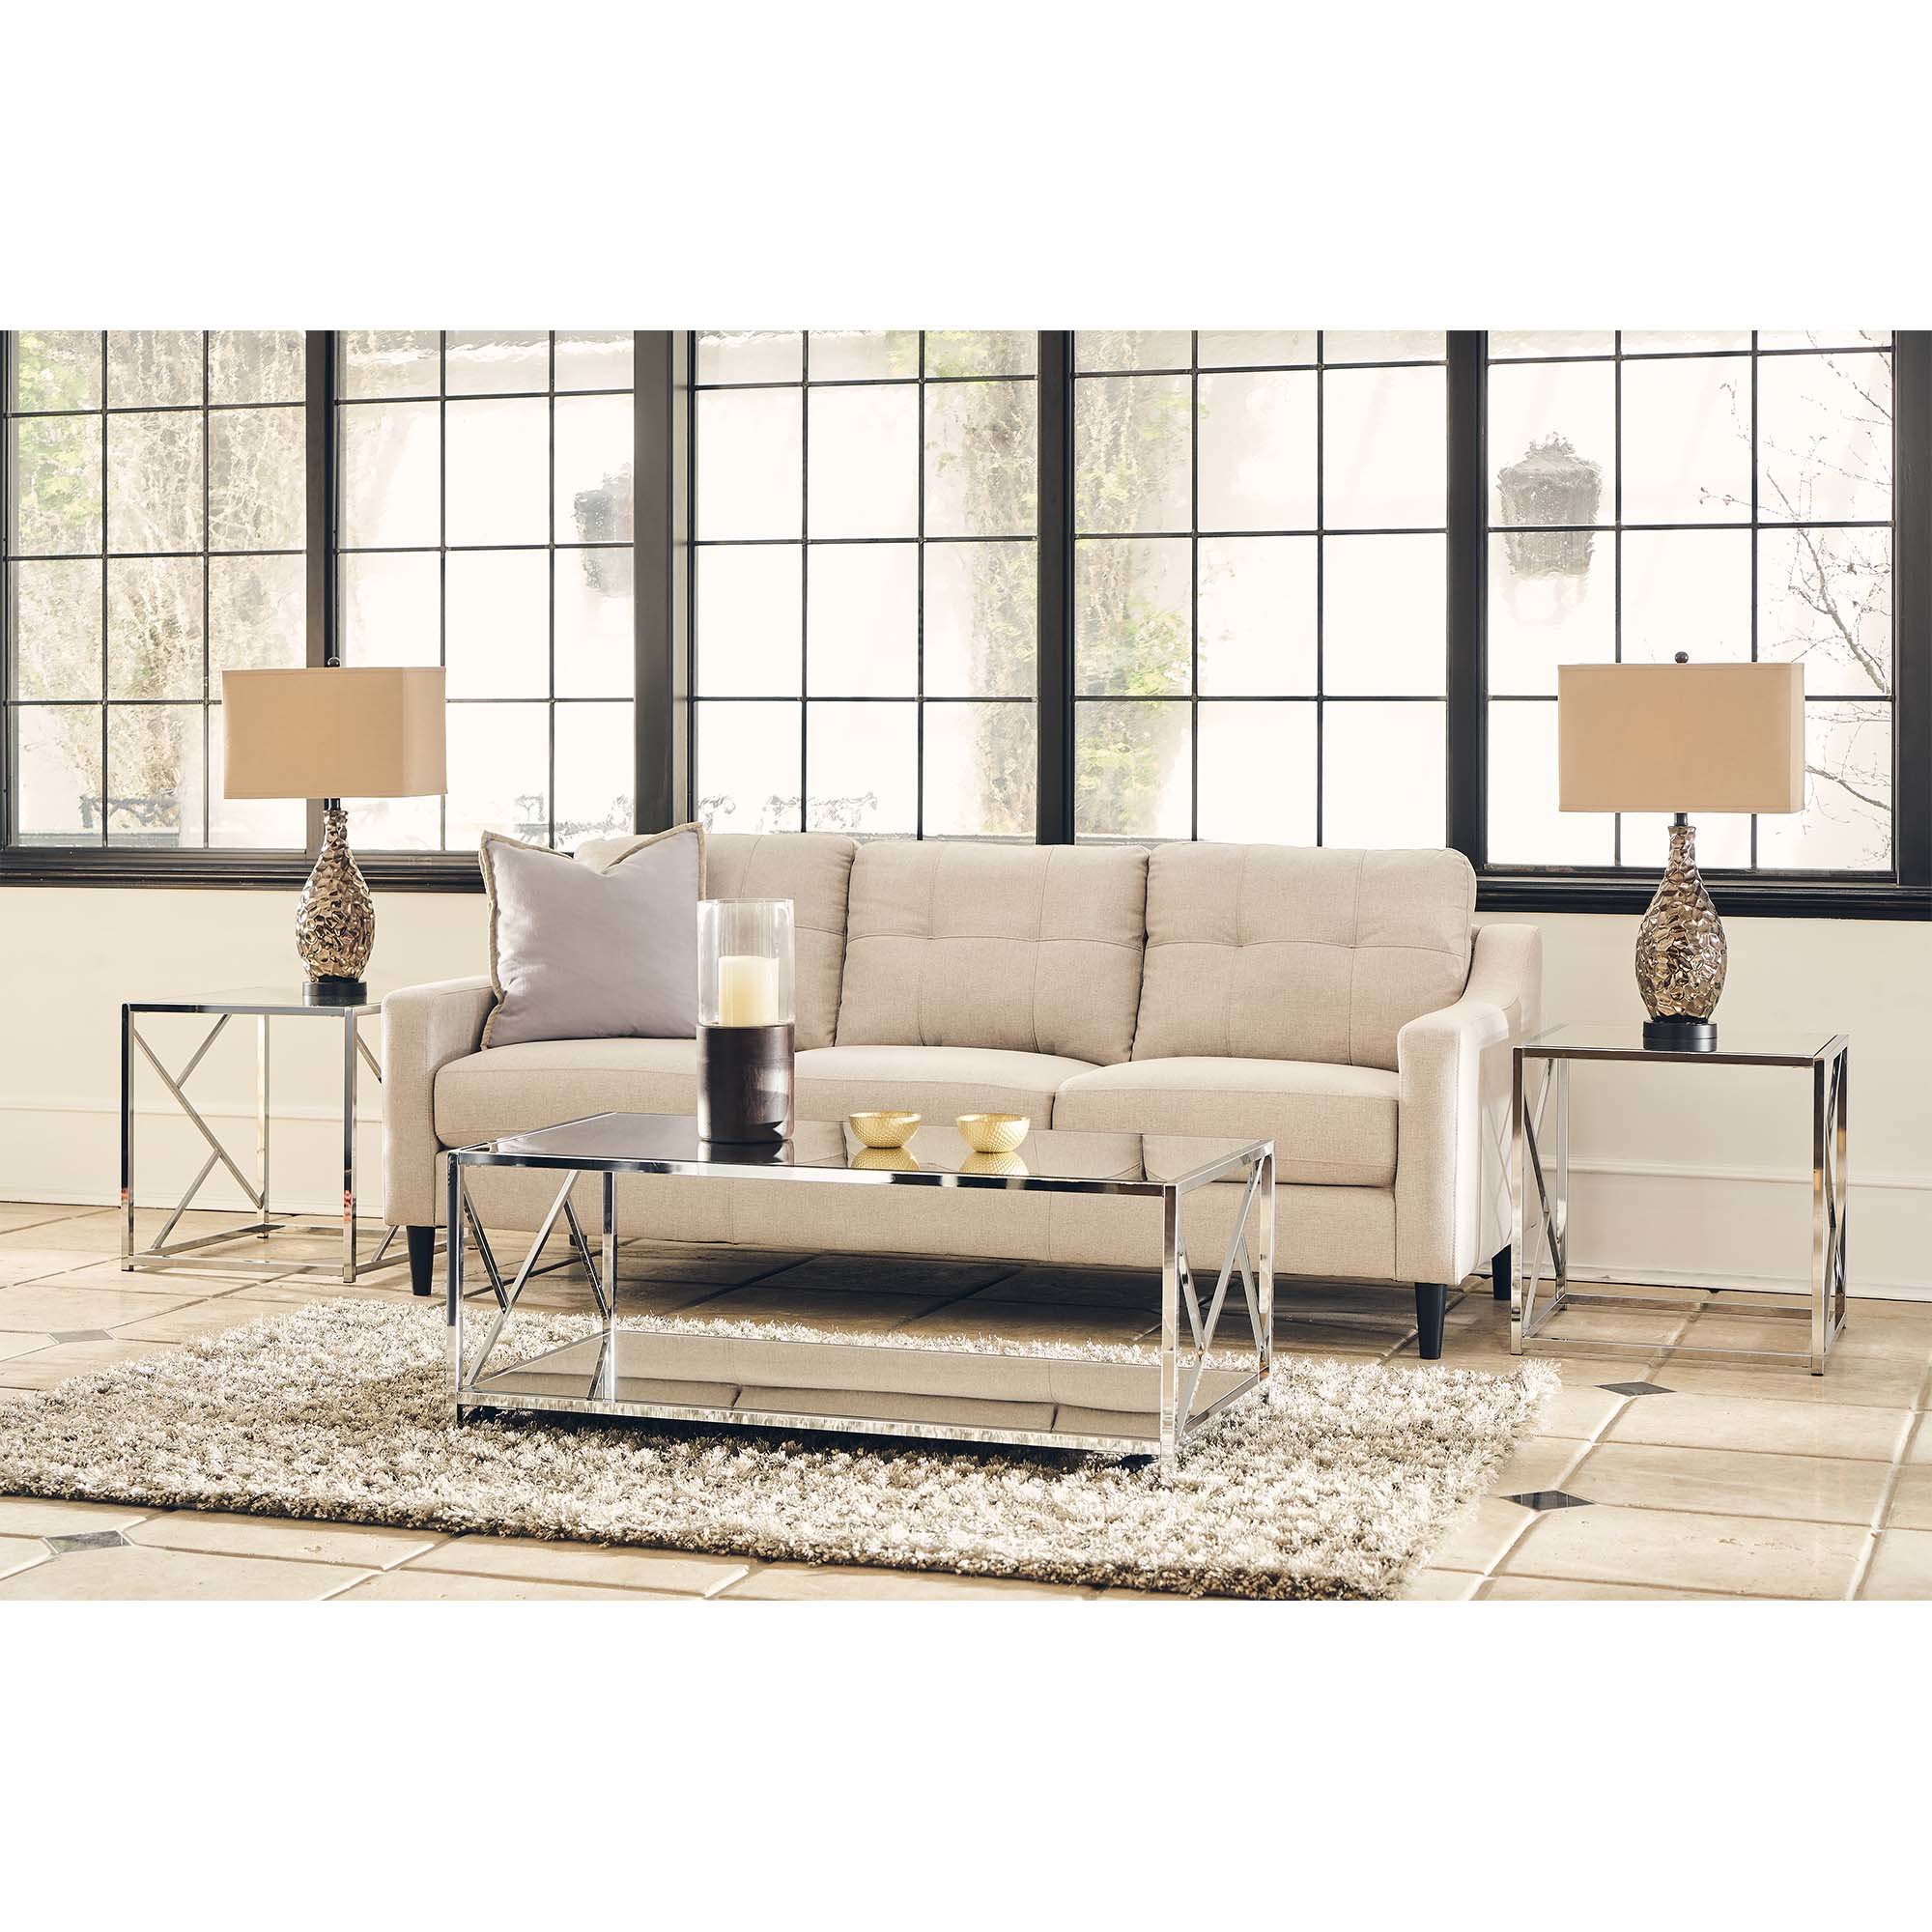 mirror coffee table sets you love kira piece set diamond mirrored accent real marble linens light colored wood end tables home goods dressers cherry dining modern couch brass